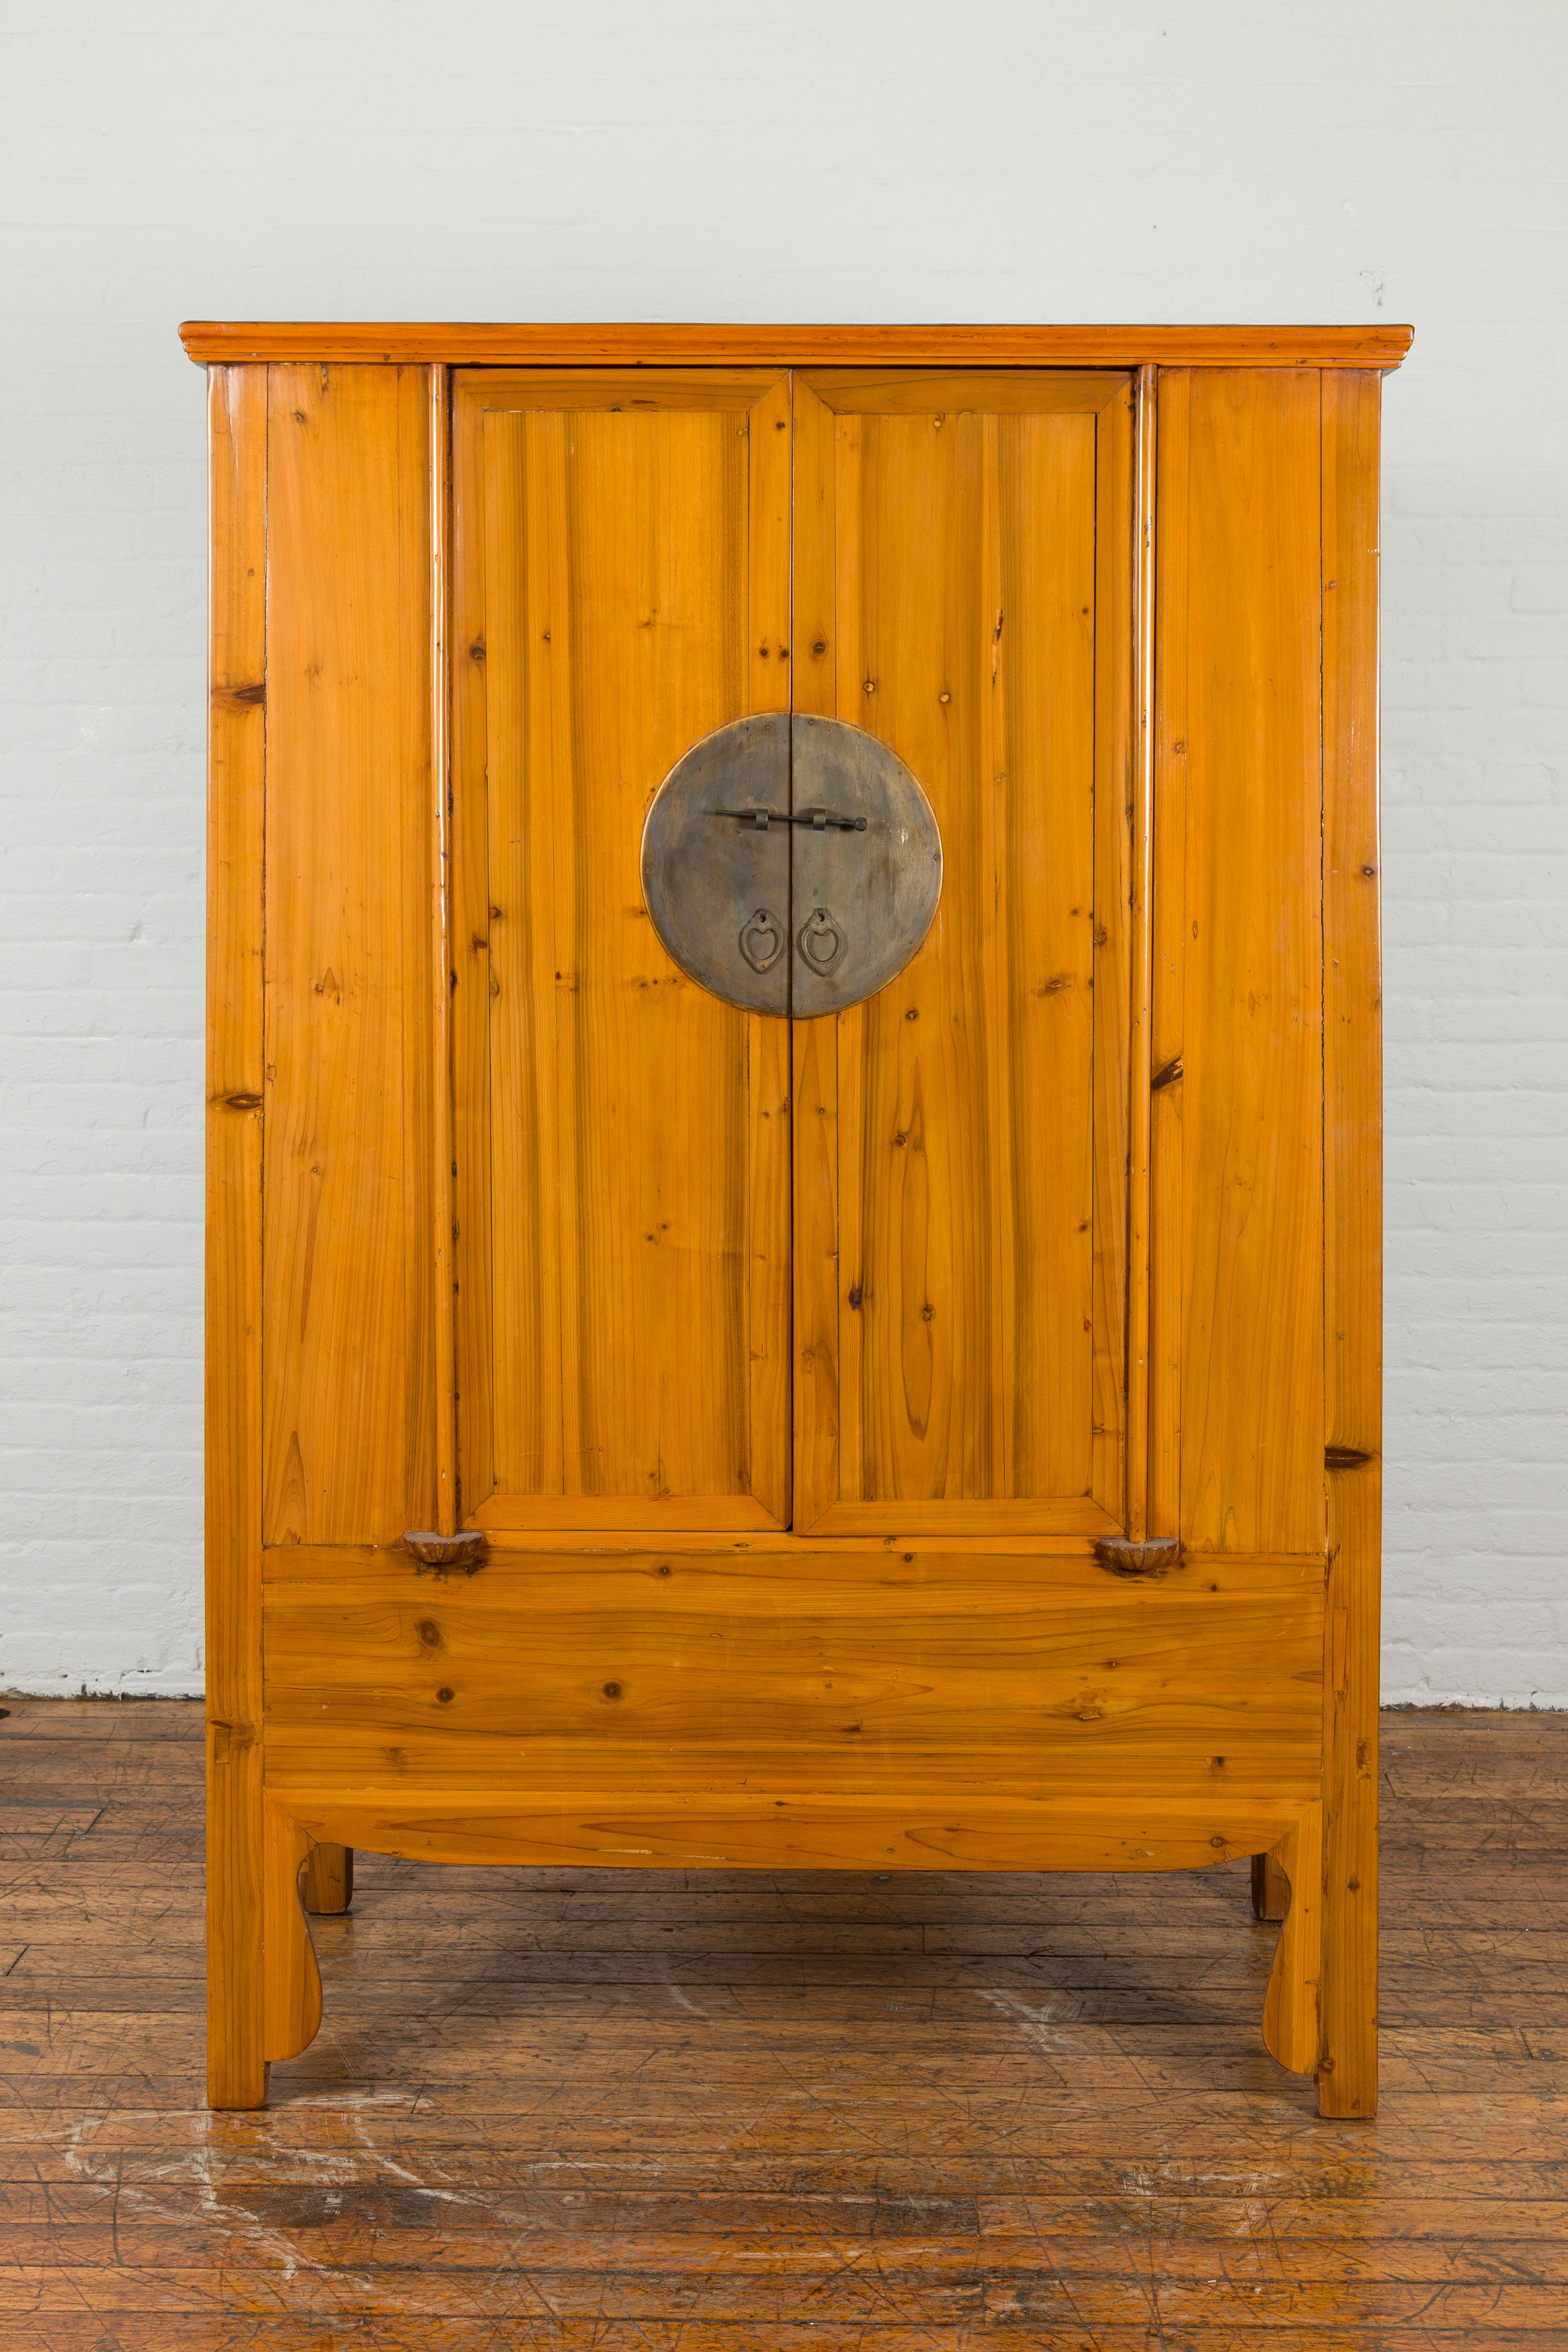 A Chinese Qing Dynasty period tapered cabinet from the 19th century, with round medallion hardware. Created in China during the Qing Dynasty, this wooden cabinet features a tapered silhouette made of two narrow doors accented with a large brass